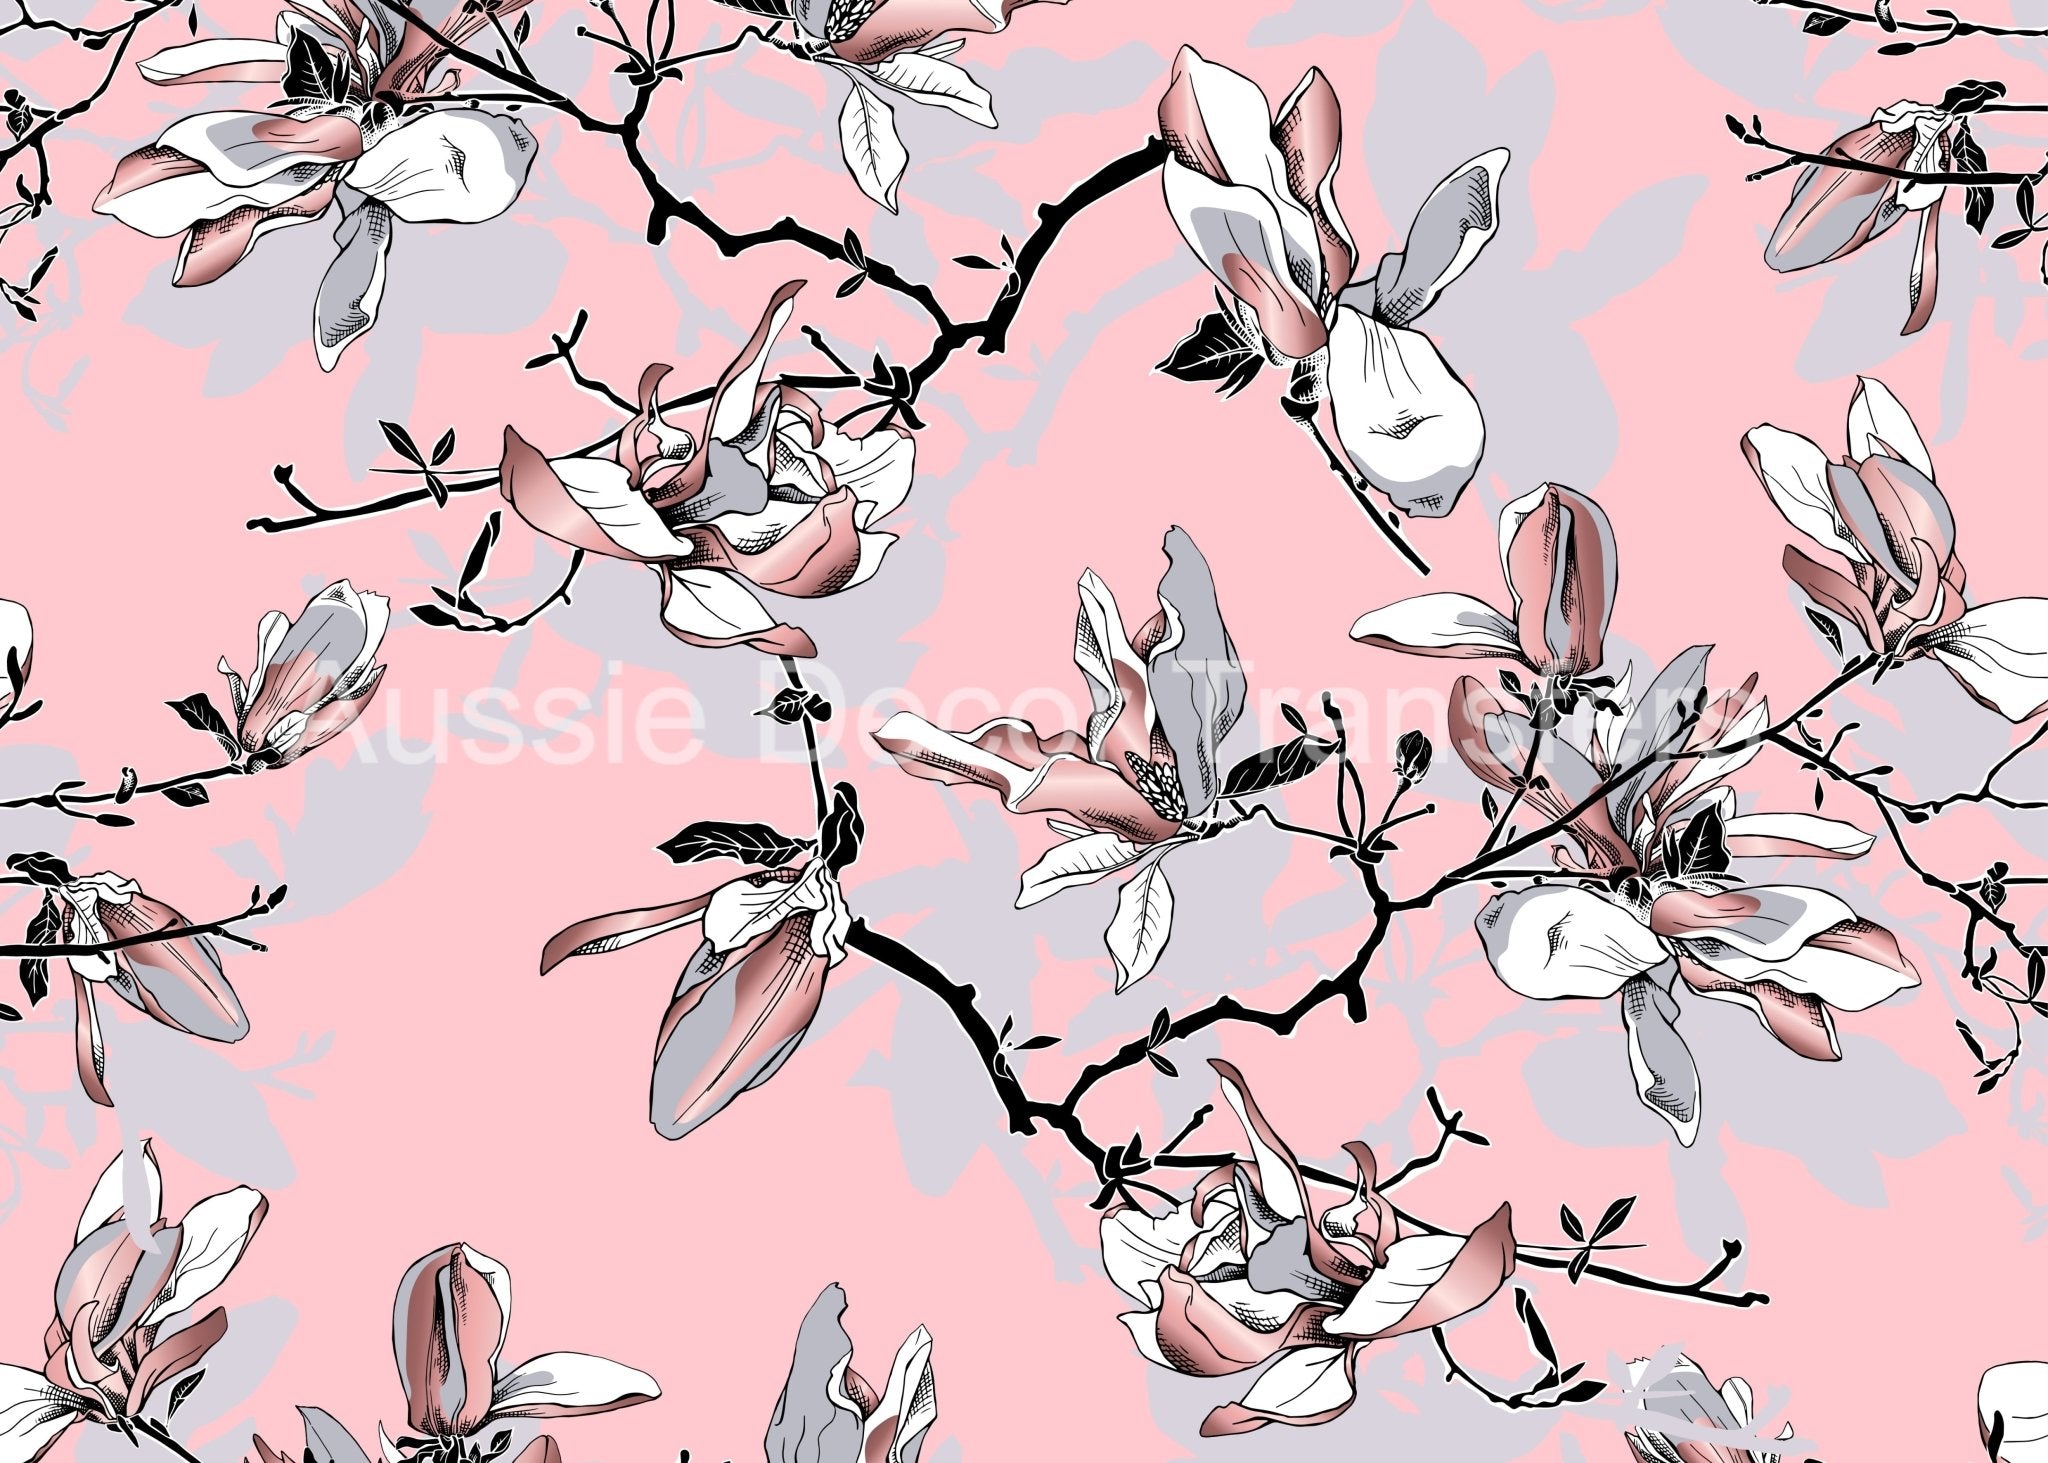 Aussie Decor Transfers Poster Print Pink & Grey Magnolias - Not Your Average Poster Print! - AUS Only